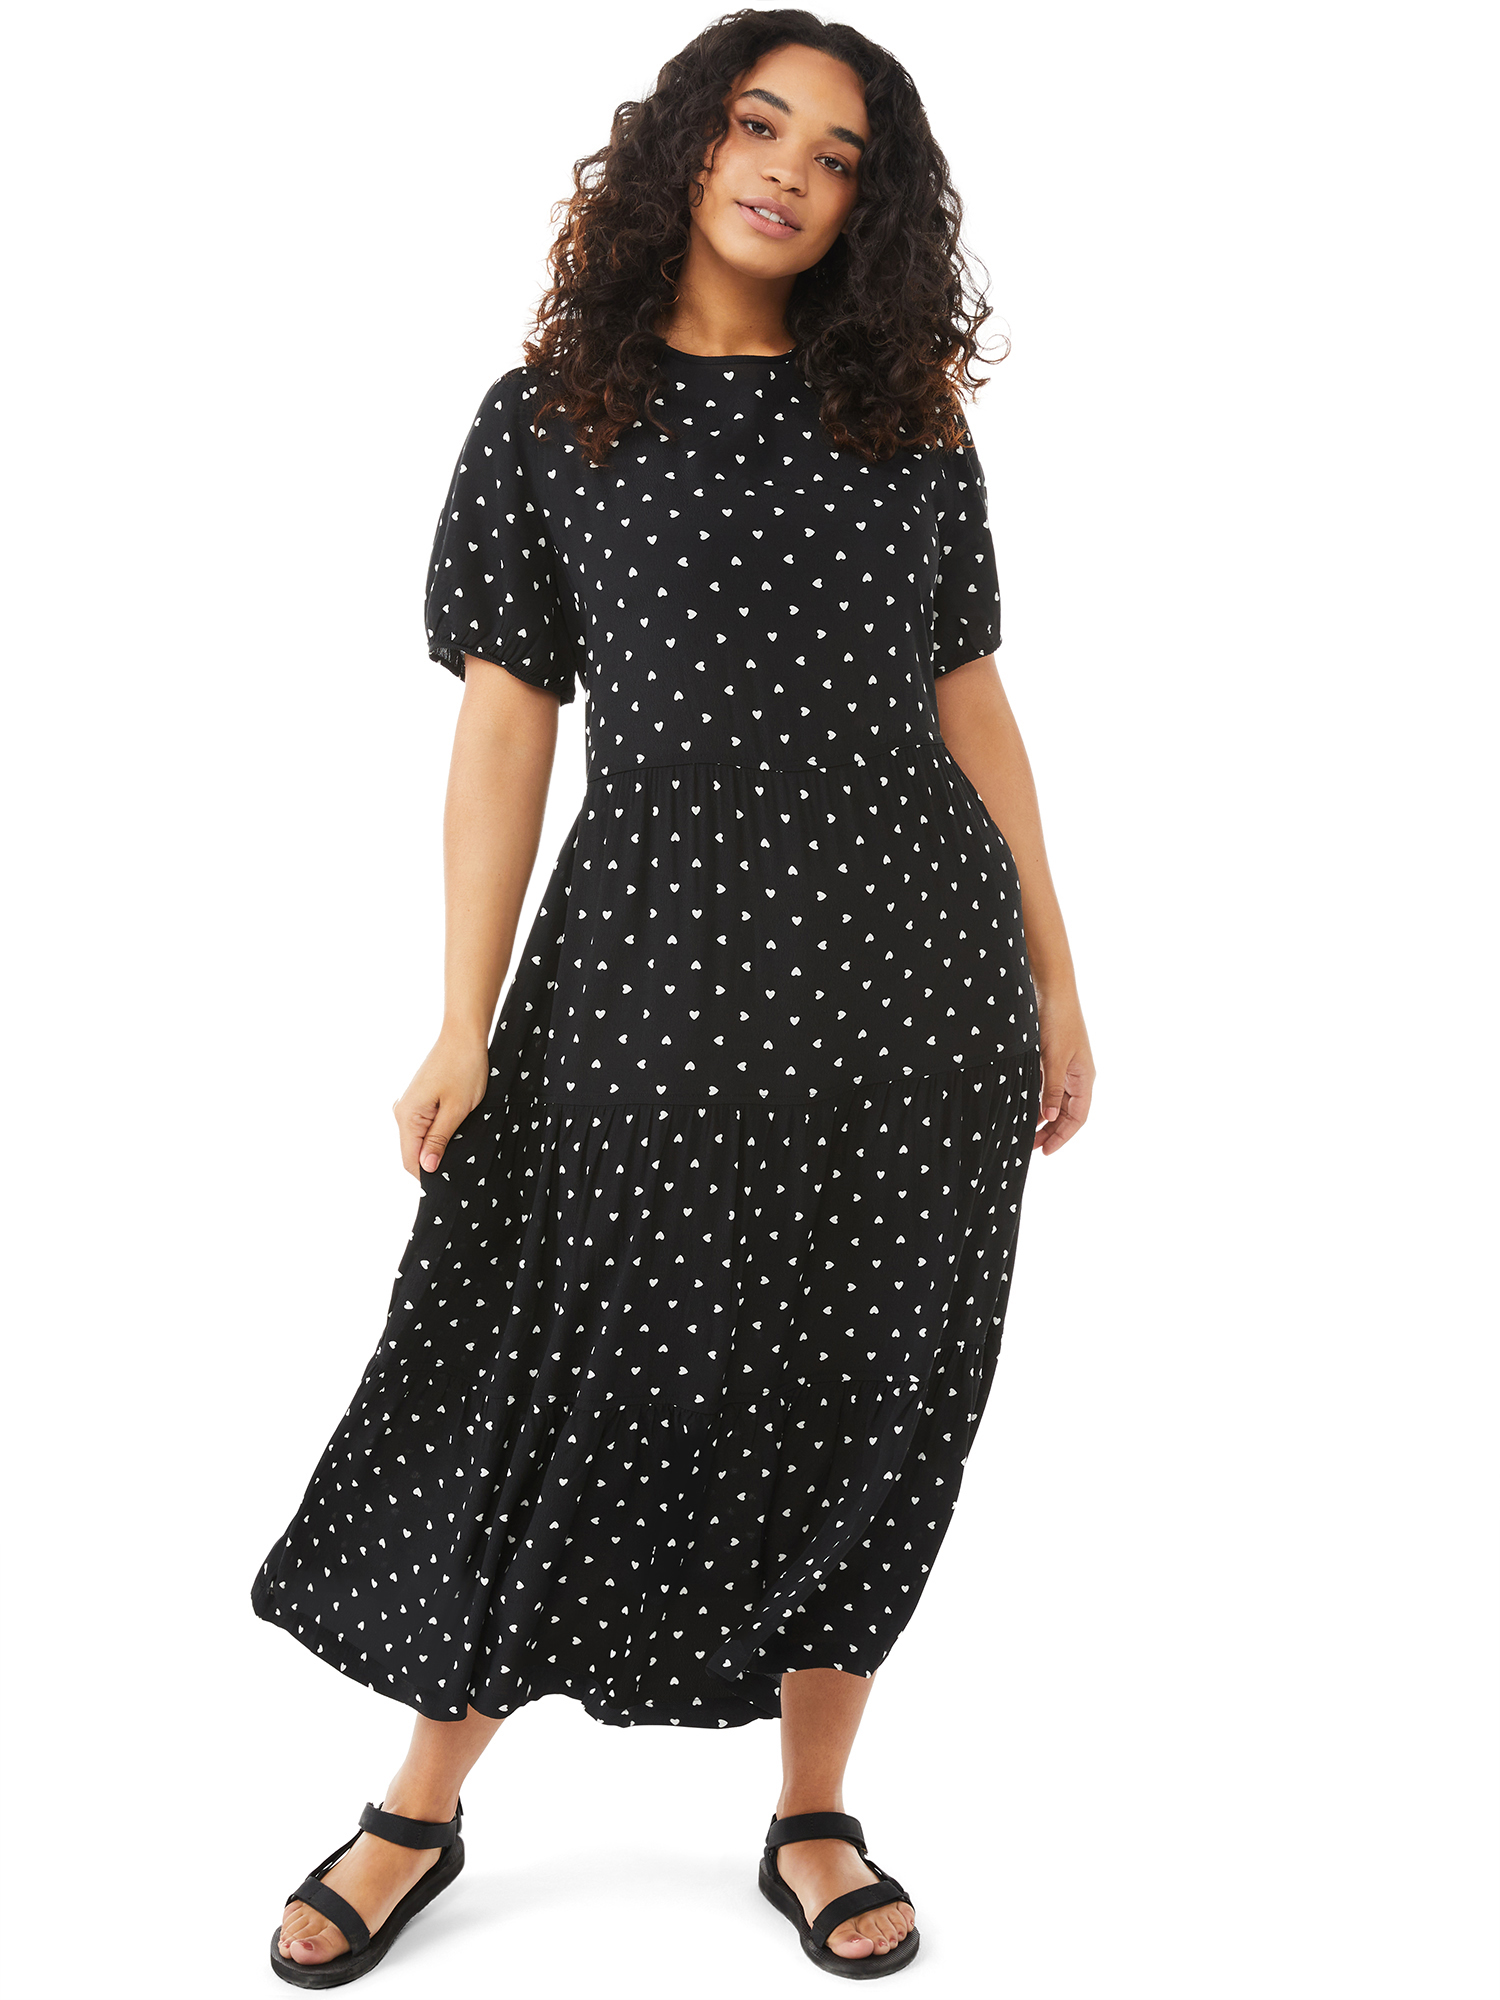 Free Assembly Women's Short Sleeve Tiered Maxi Dress - image 2 of 6